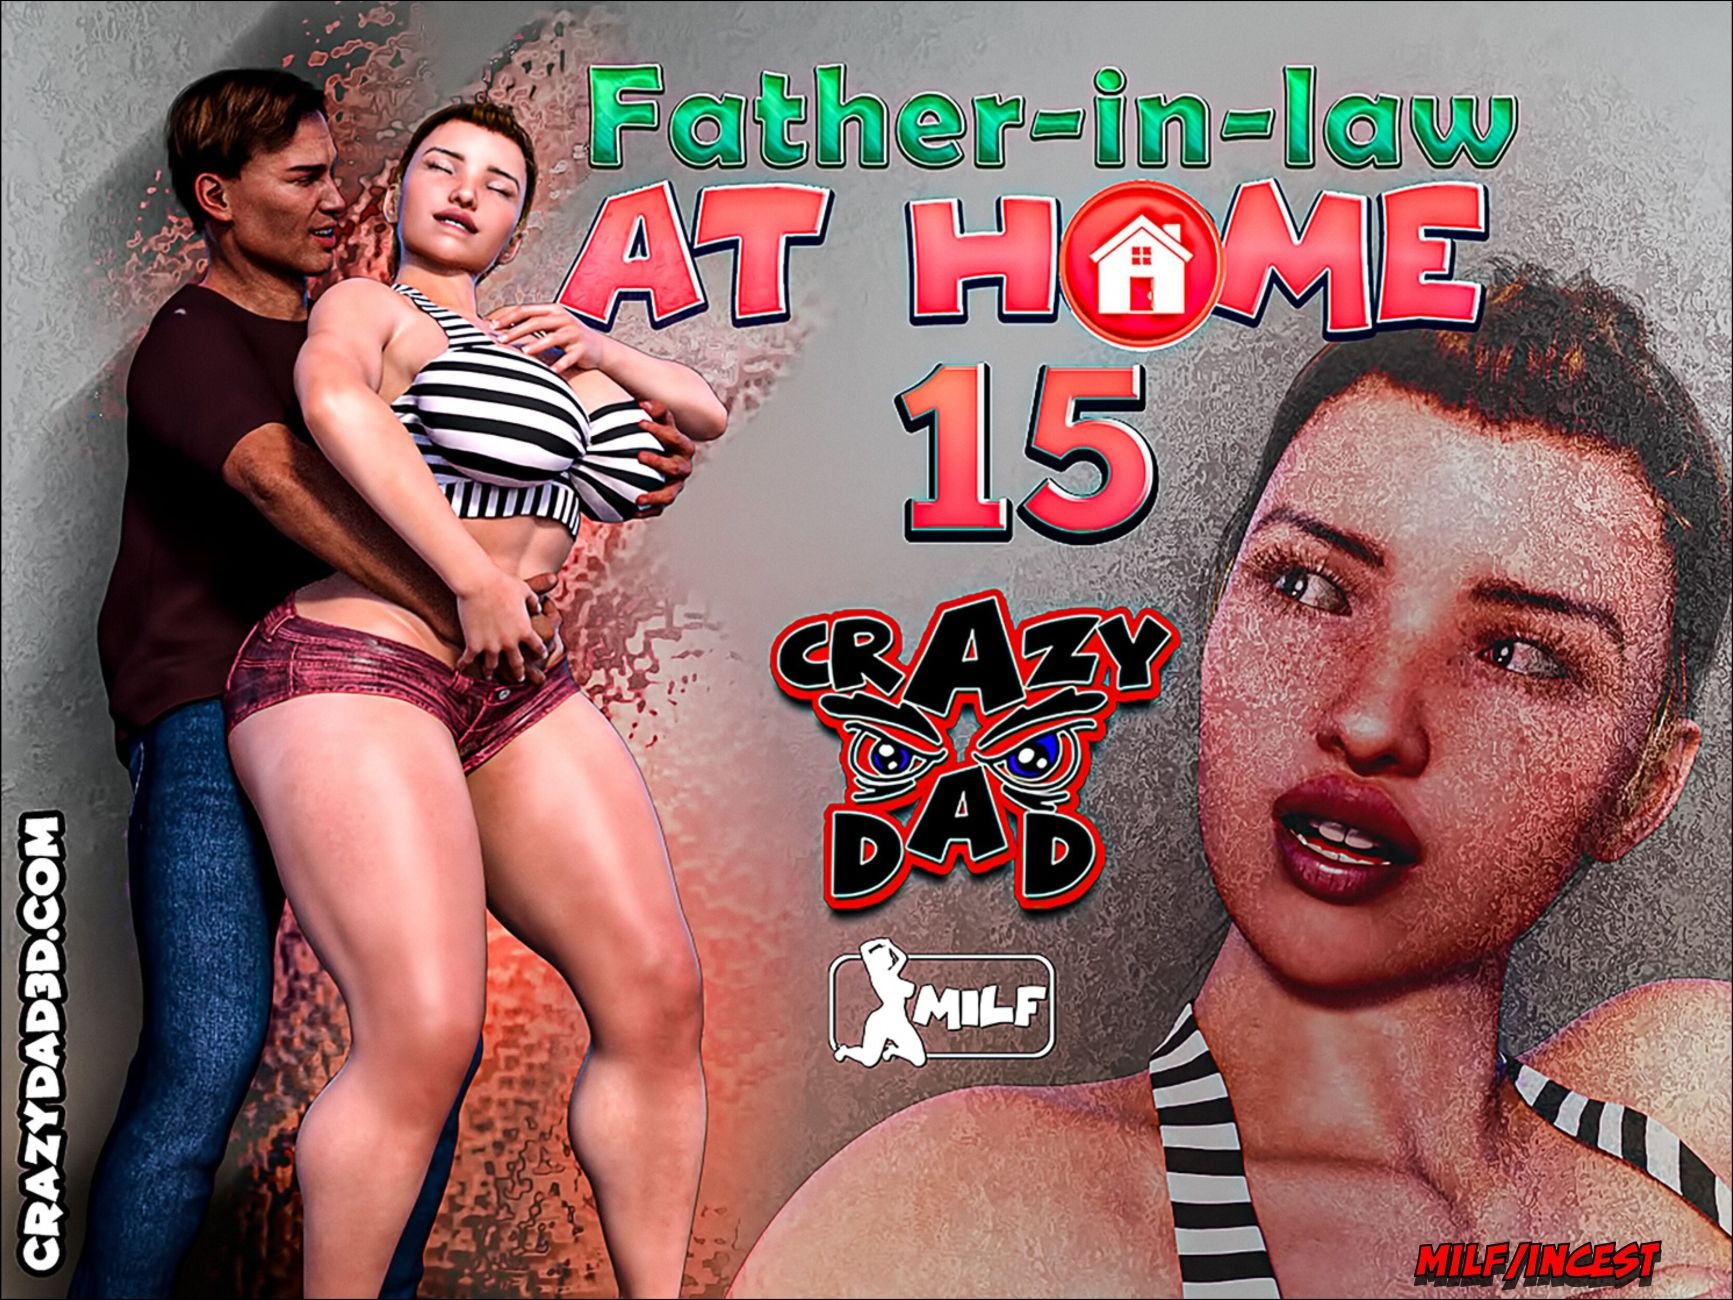 Dad In Law - Crazy Dad 3d â€“ Father-in-law at home 15 - TeenSpiritHentai